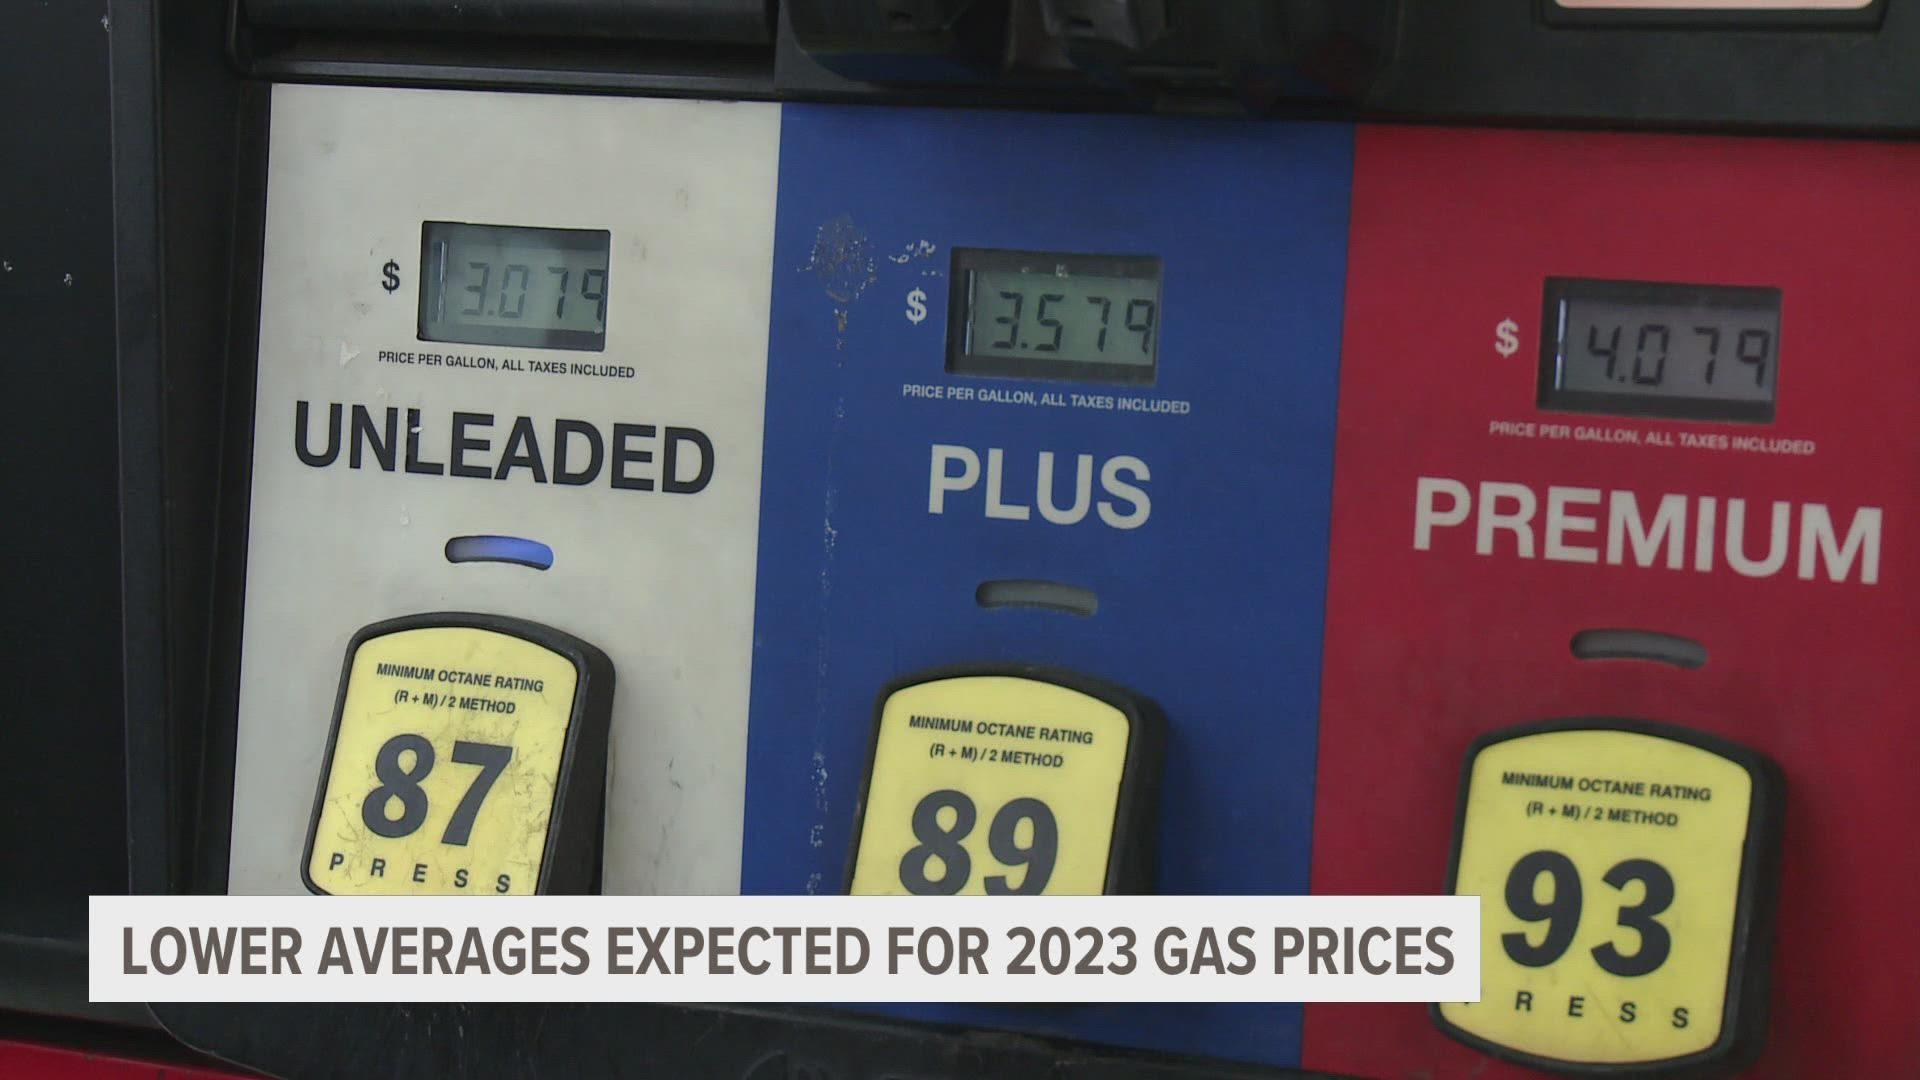 As we approach 2023, drivers could see lower than average gas prices compared to this year.